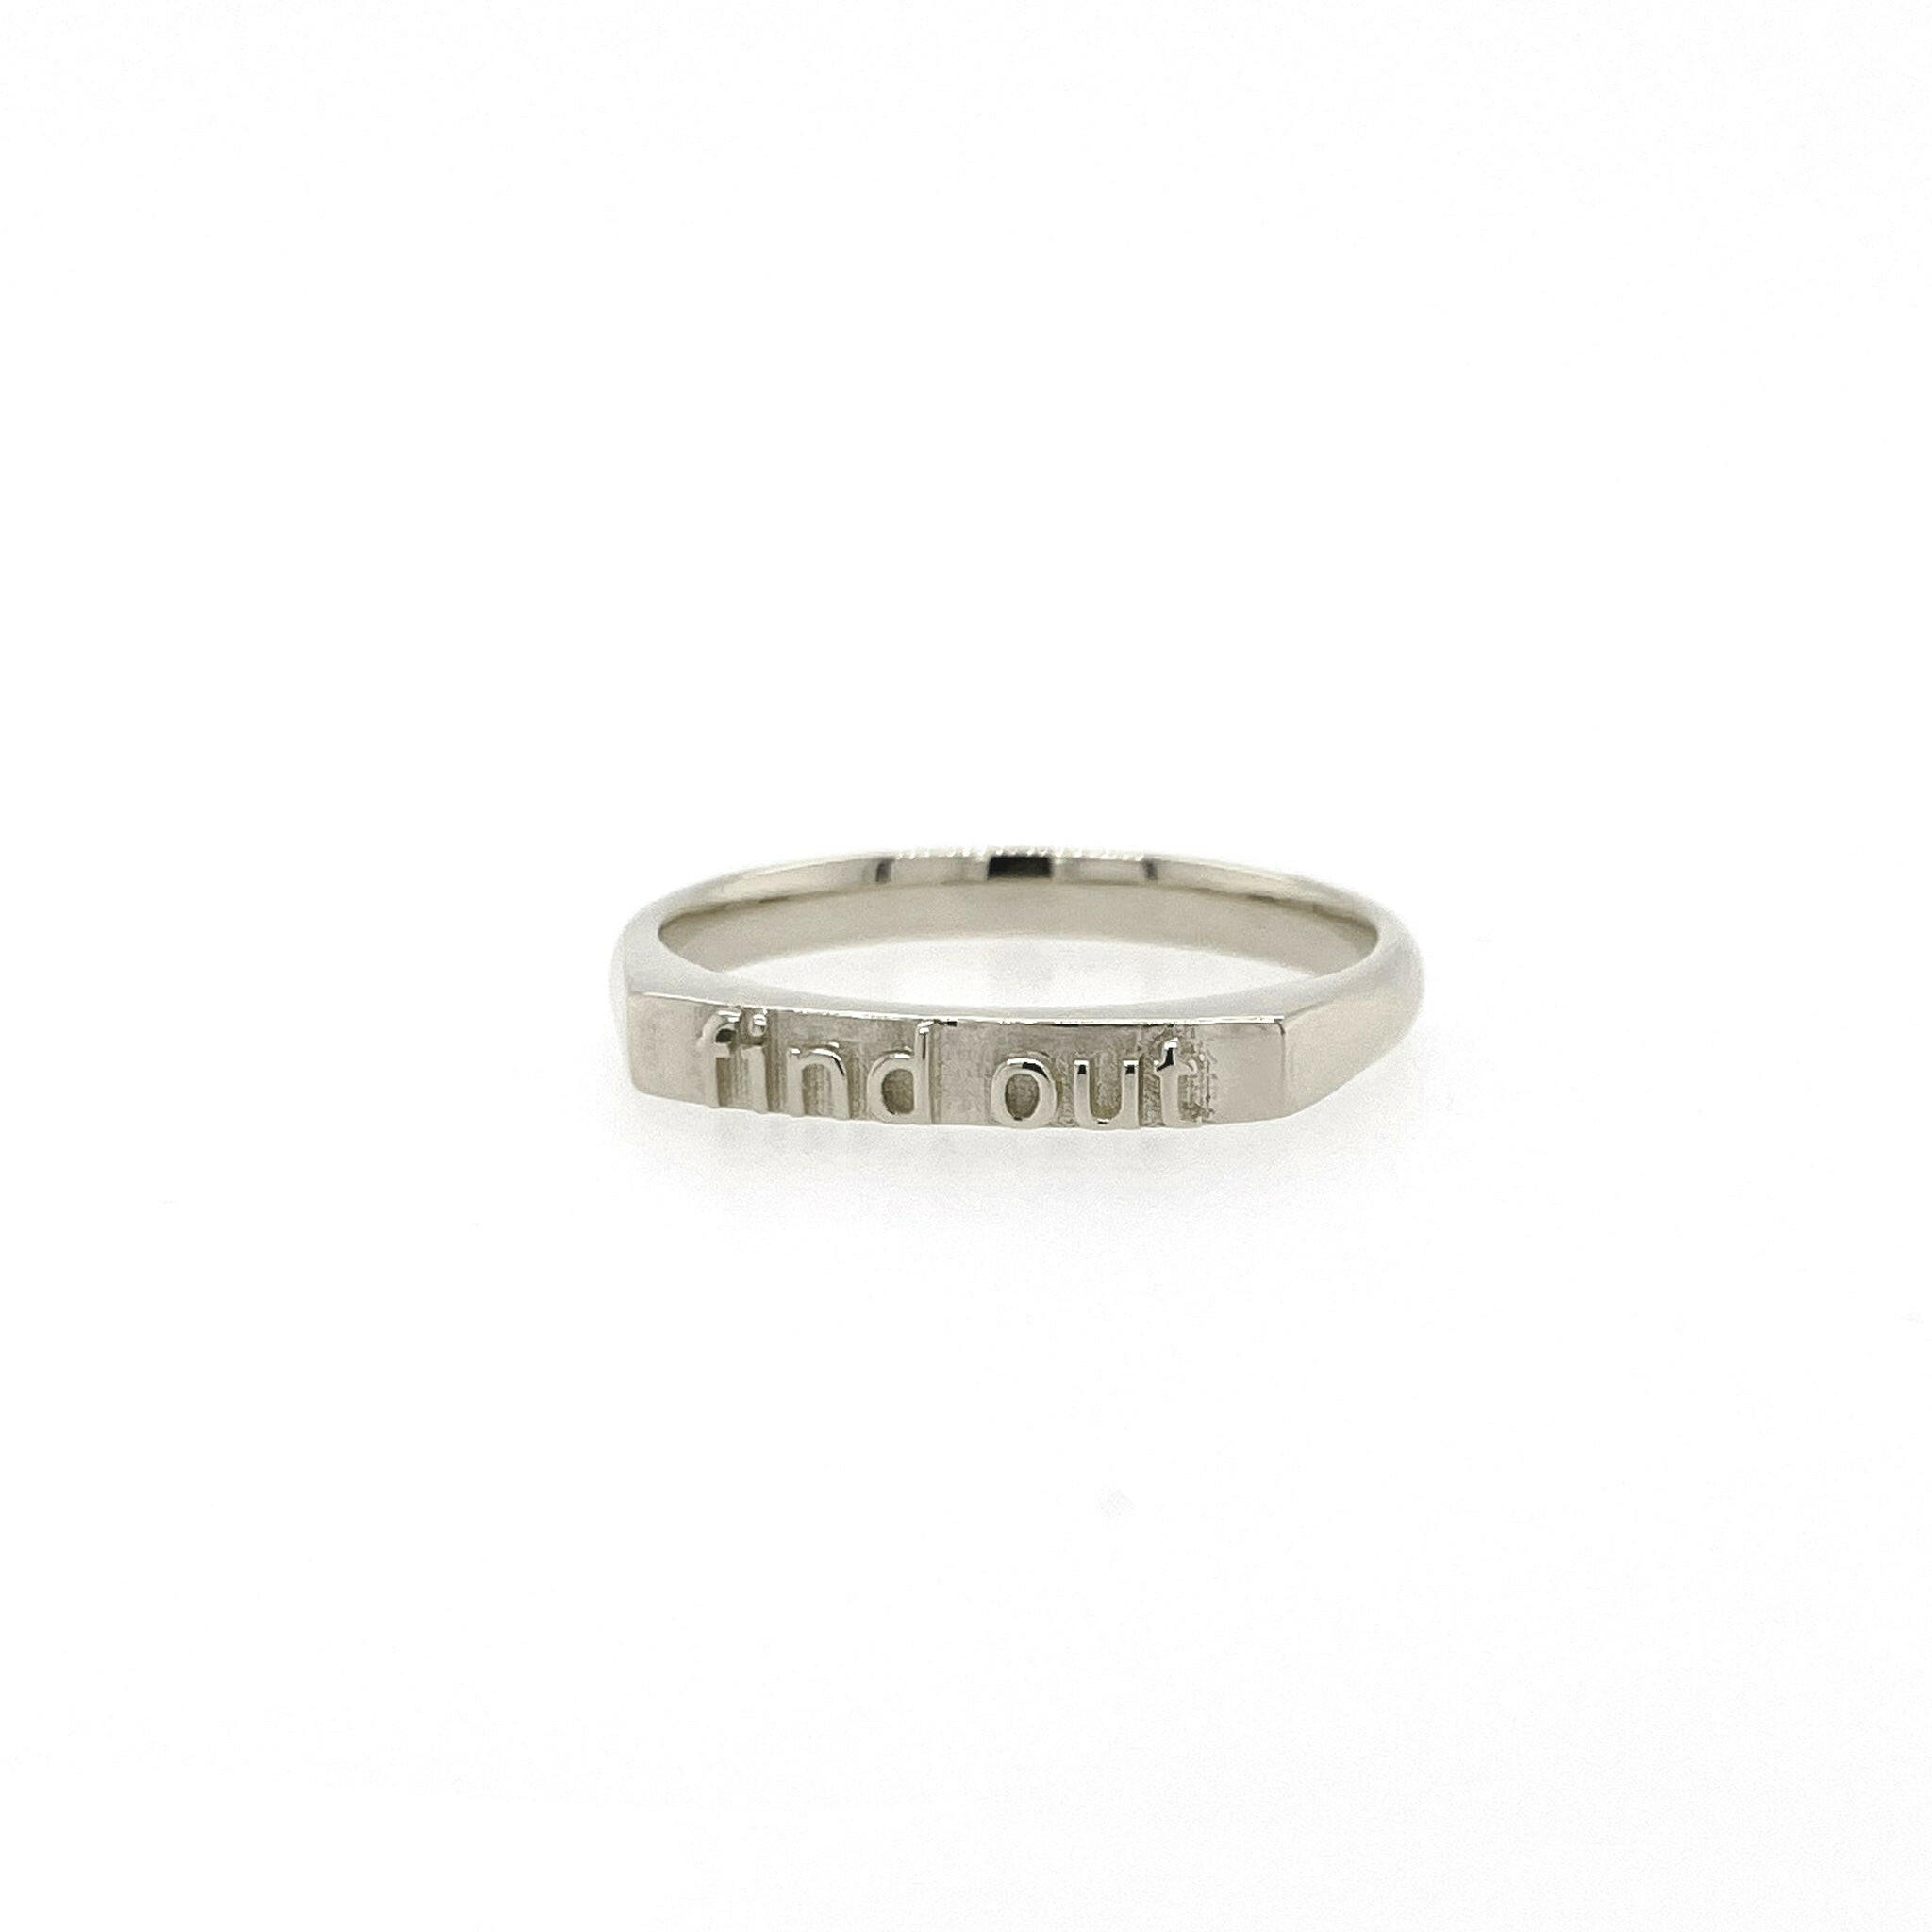 slightly right angled 14 karat white gold ring with text that reads "find out"